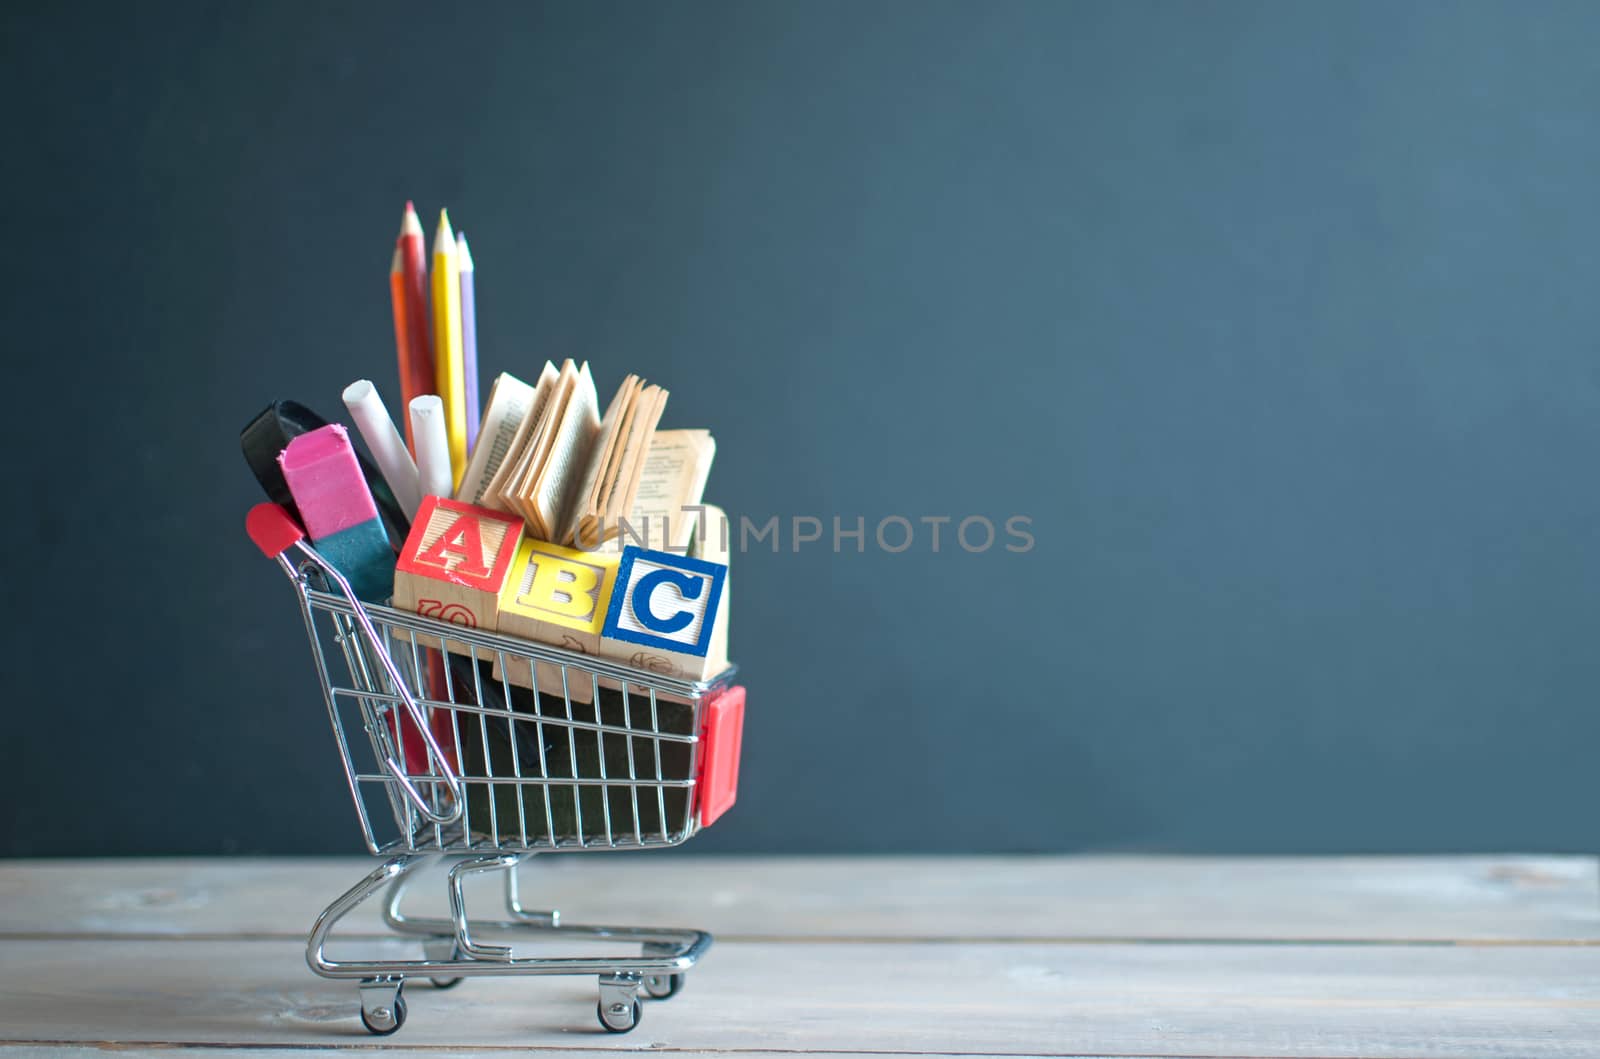 Shopping cart filled with stationery merchandise against chalkboard